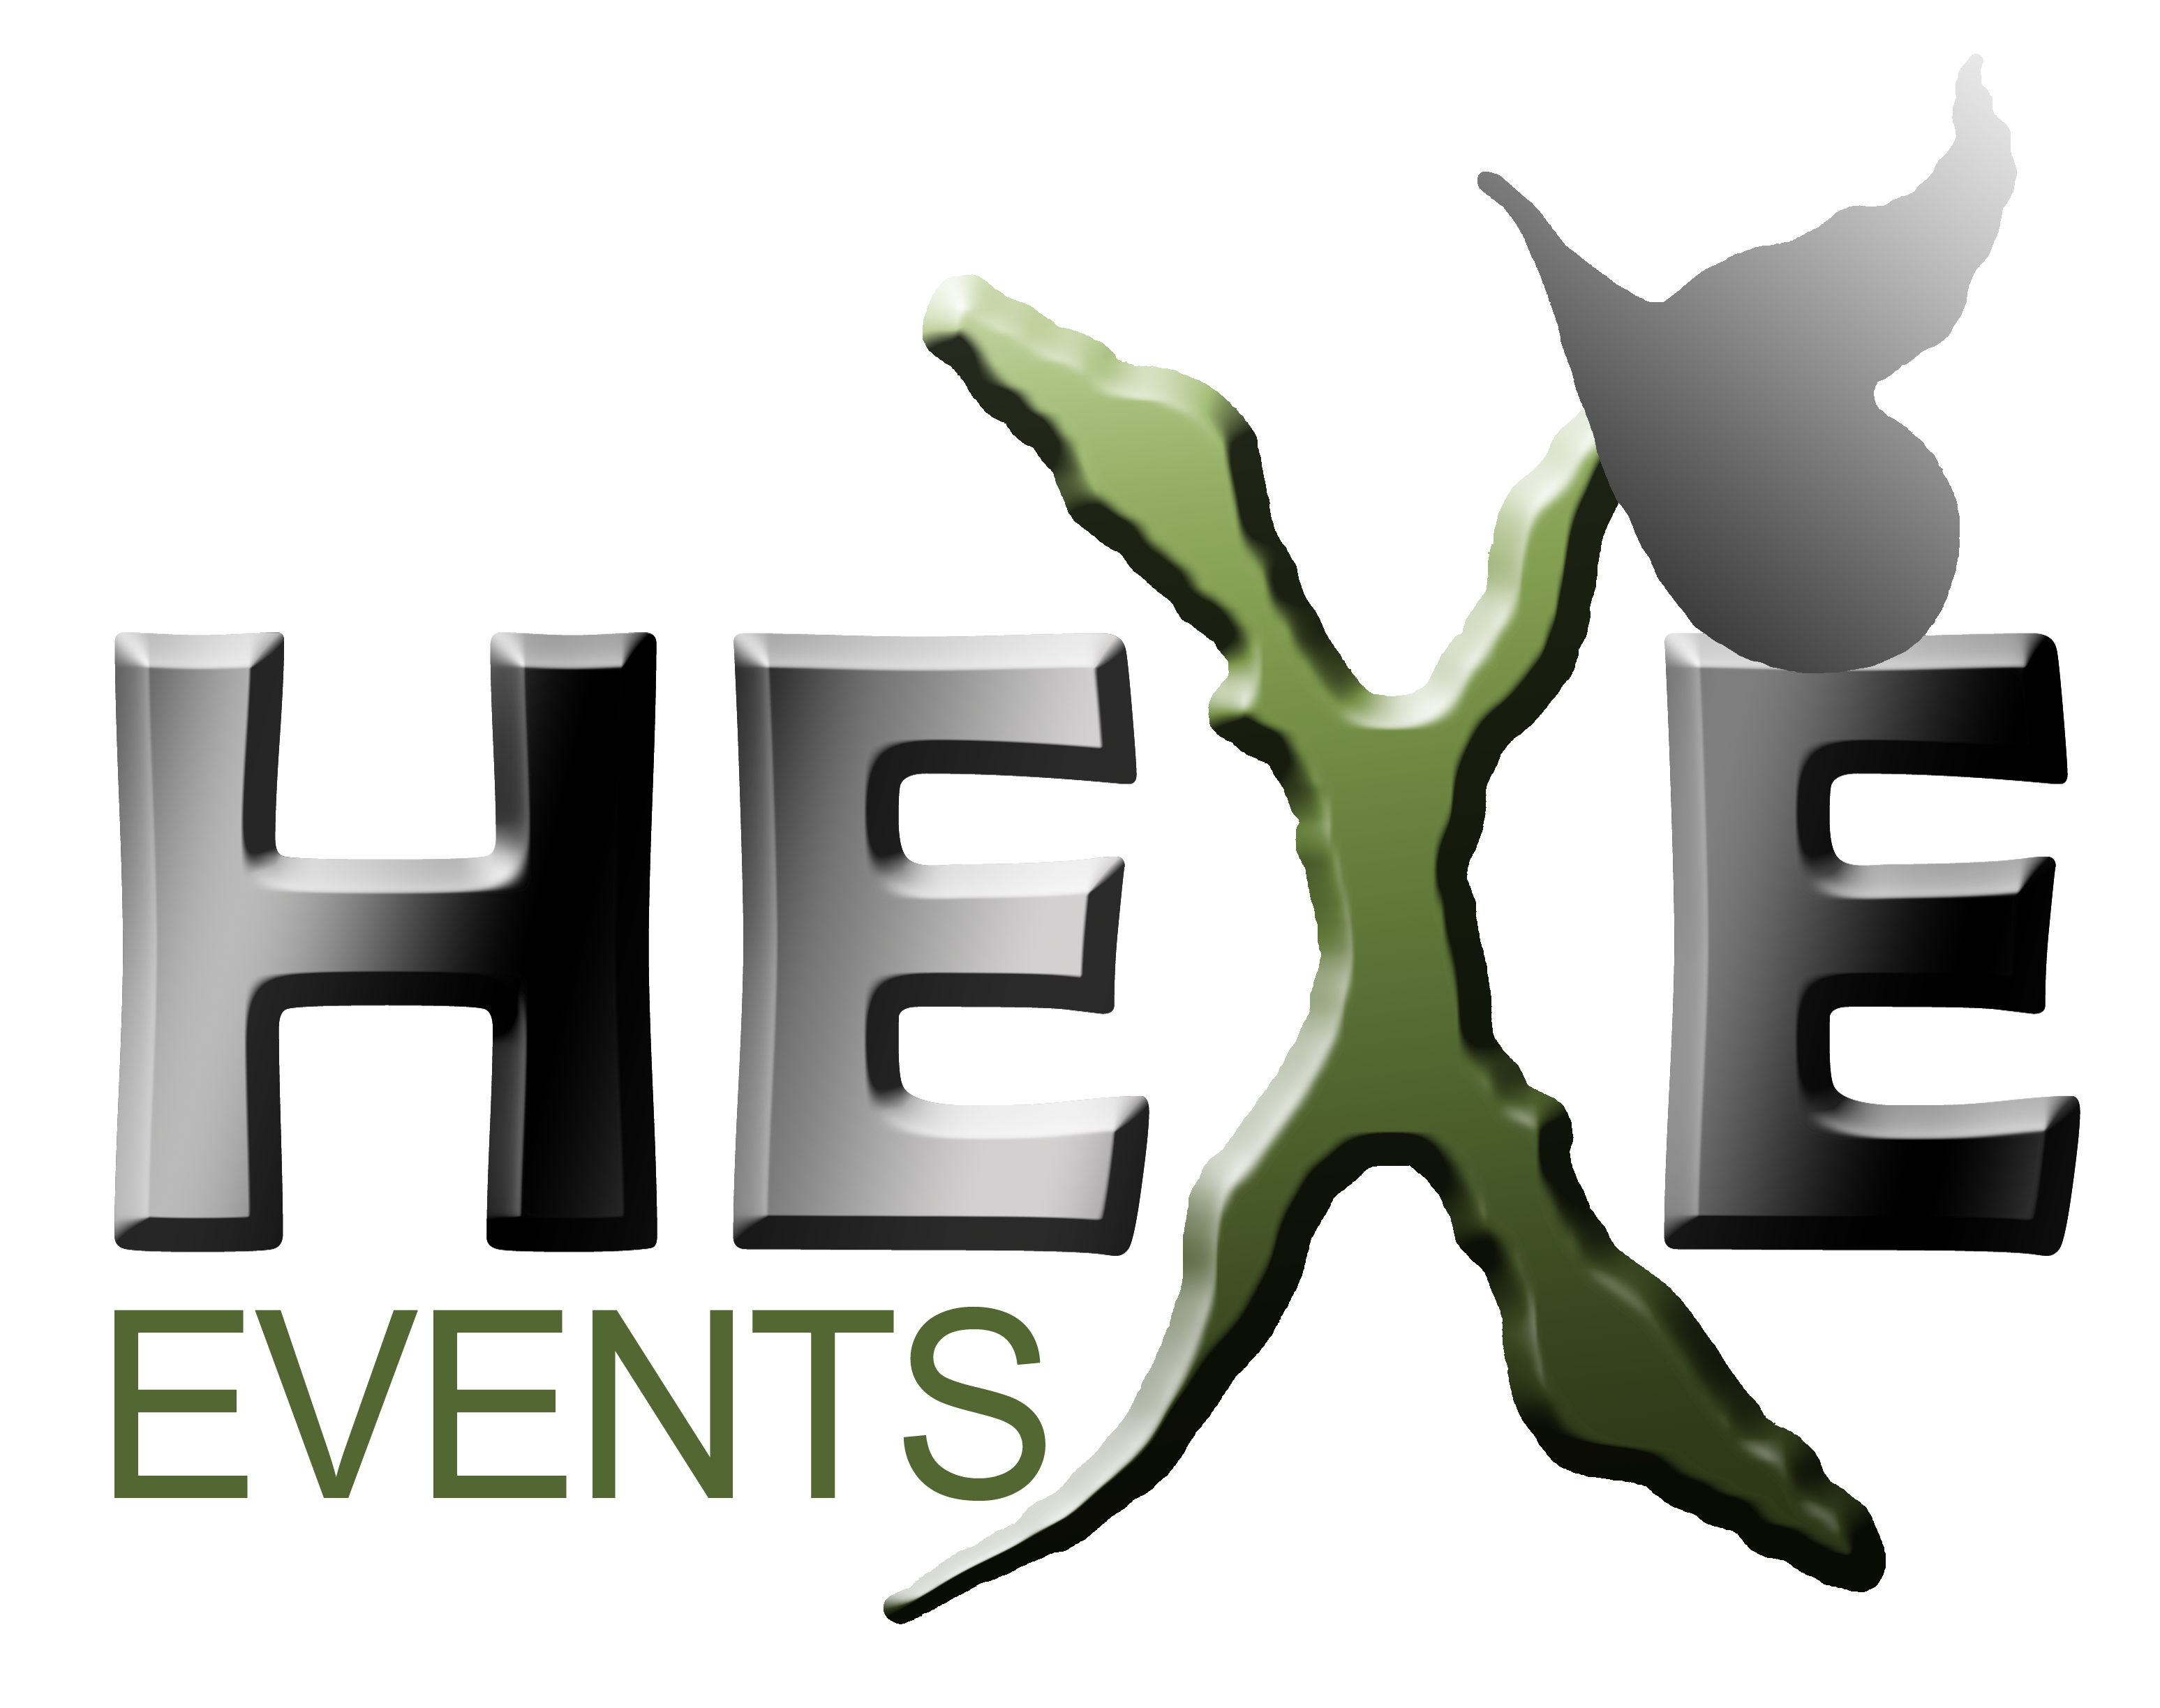 Hexe Events